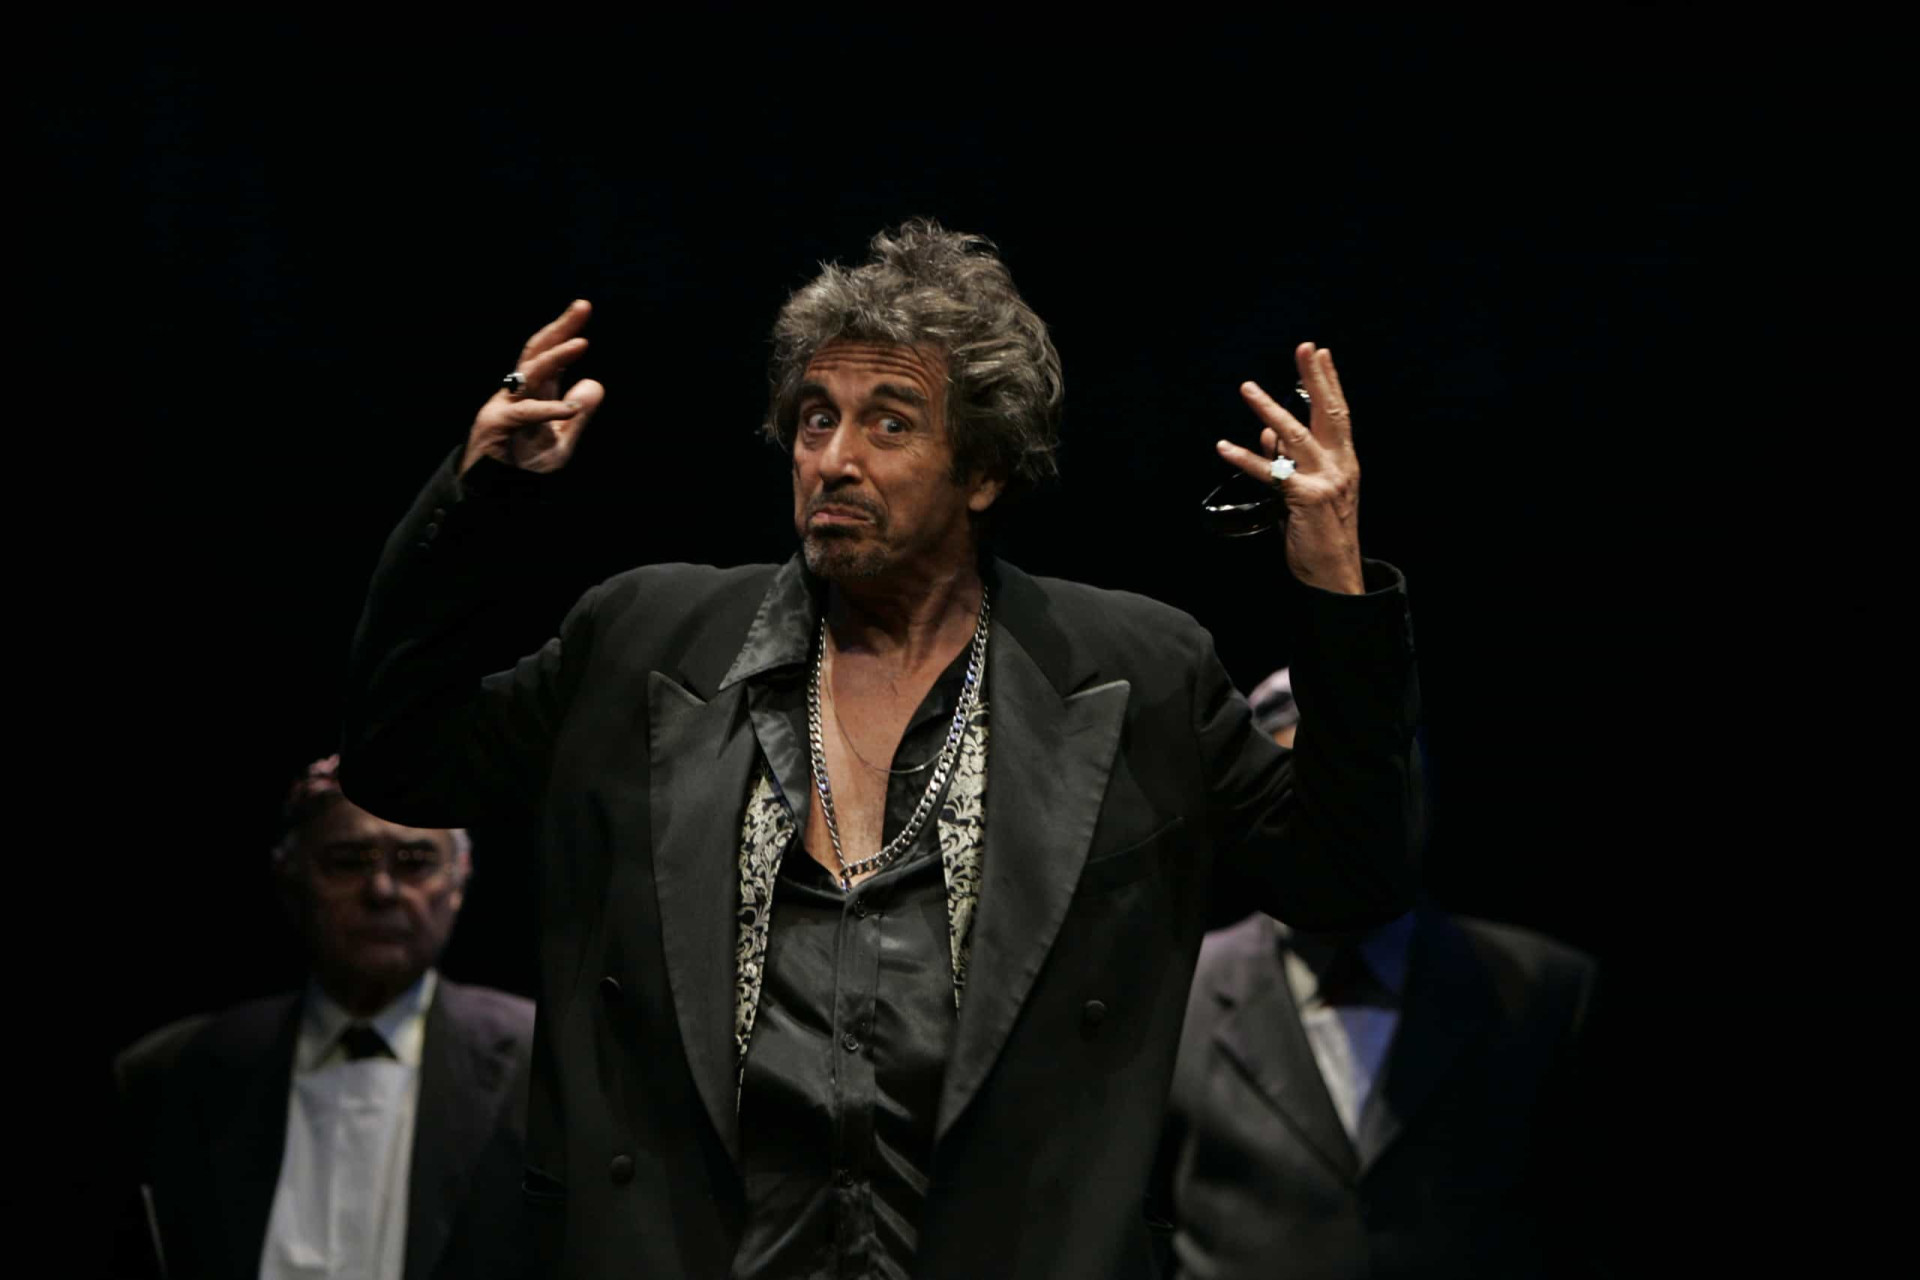 <p>Pictured: <a href="https://www.starsinsider.com/celebrity/353905/al-pacino-at-80-five-decades-in-movies" rel="noopener">Al Pacino</a> in a highly acclaimed 2006 production of 'Salome' staged at the historic Wadsworth Theatre in Los Angeles.</p><p>You may also like:<a href="https://www.starsinsider.com/n/438769?utm_source=msn.com&utm_medium=display&utm_campaign=referral_description&utm_content=443911v5en-us"> Three-ingredient recipes that will blow your mind</a></p>